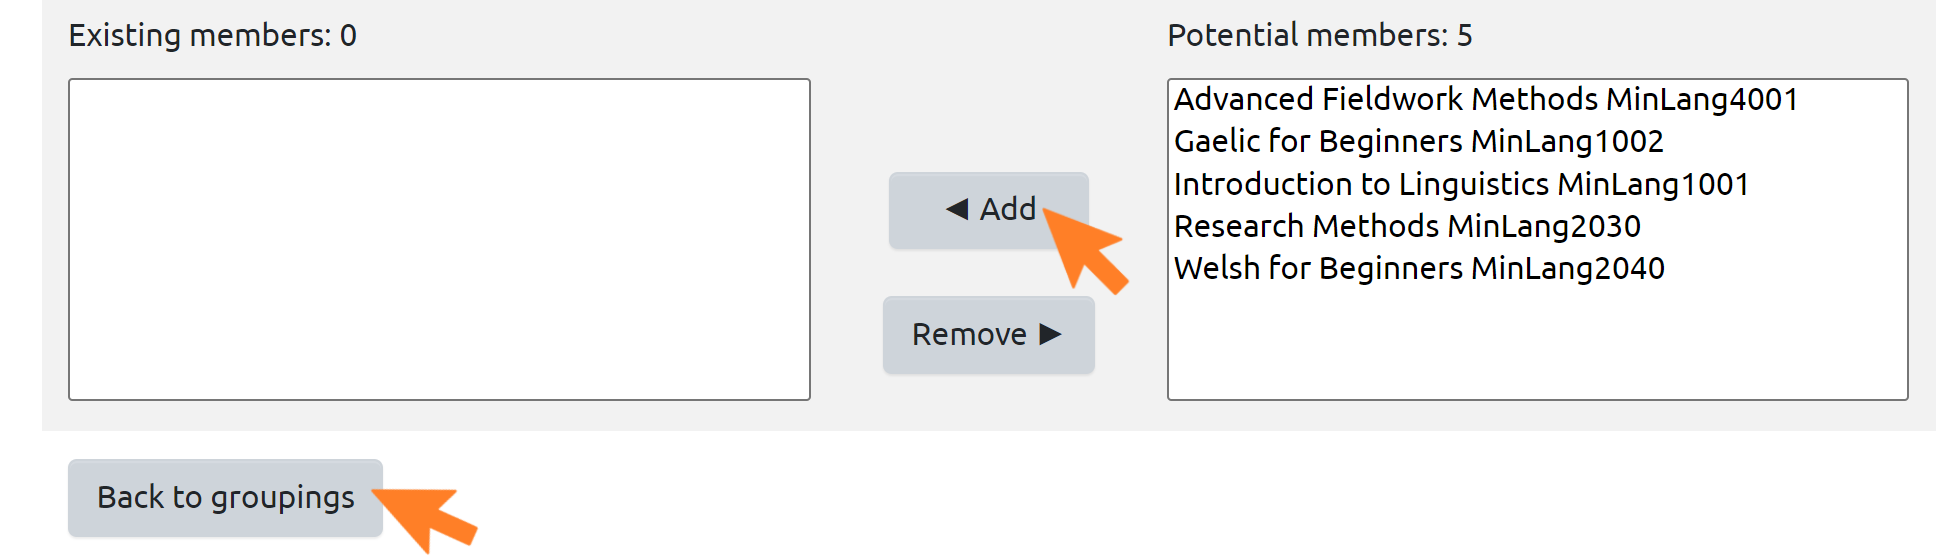 This image shows an arrow pointing to Add and another arrow Back to Grouping